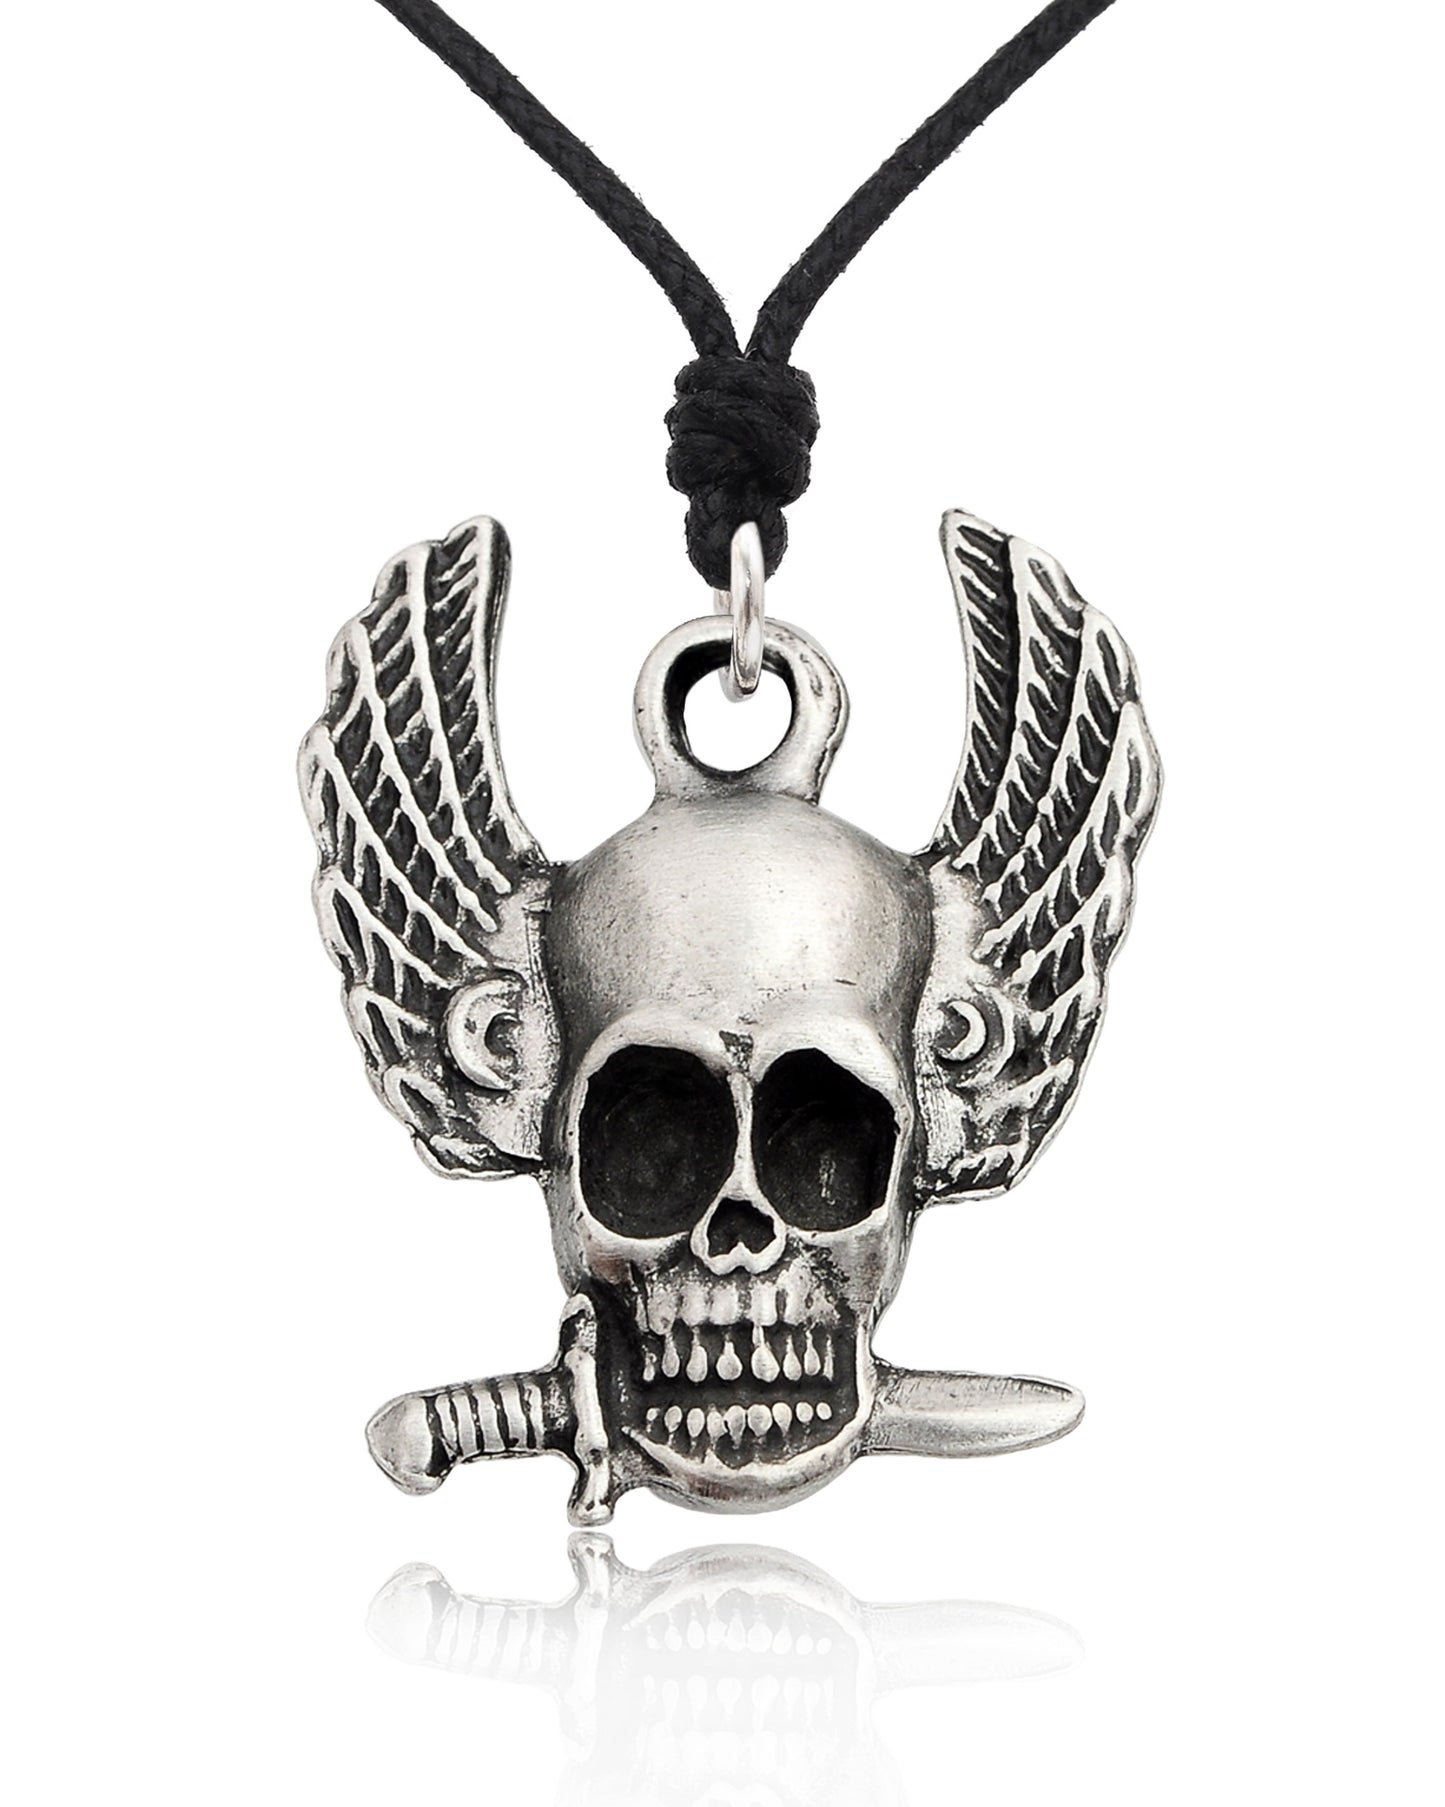 Skeleton Head Winged Silver Pewter Gold Brass Charm Necklace Pendant Jewelry